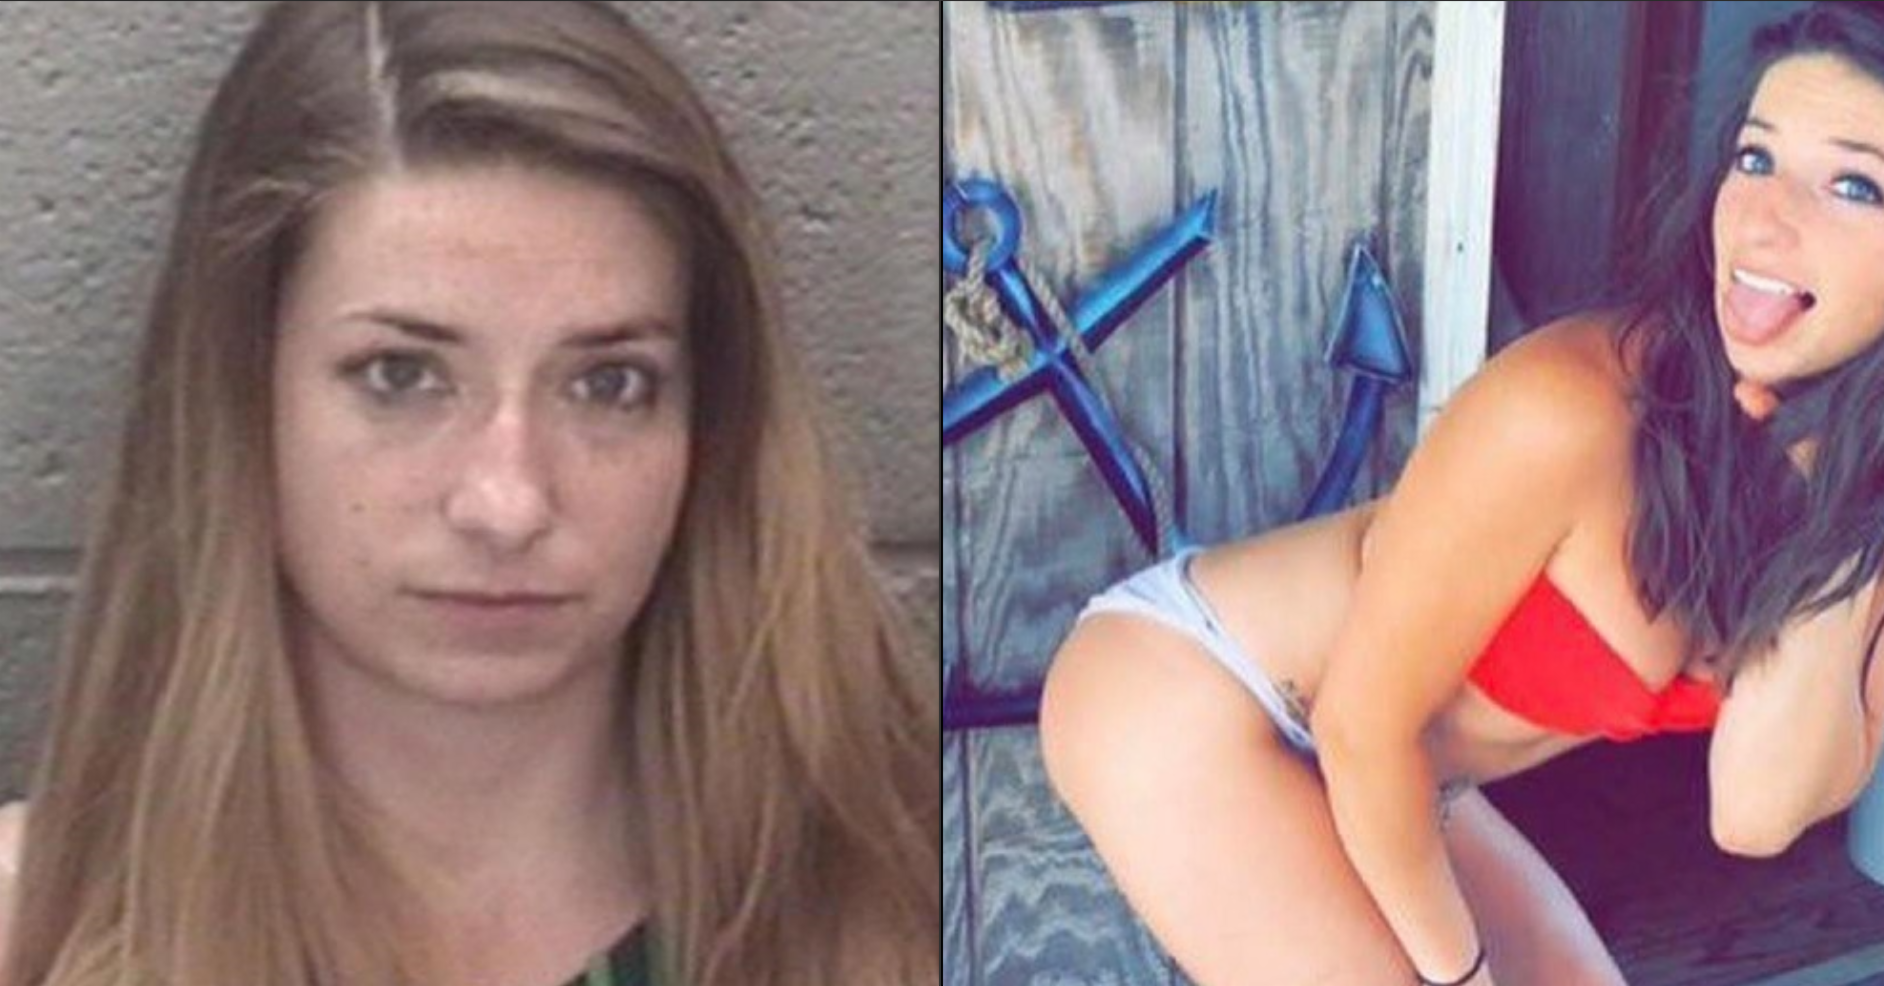 The Internet Discovered More Racy Photos Of The Smokeshow Math Teacher 